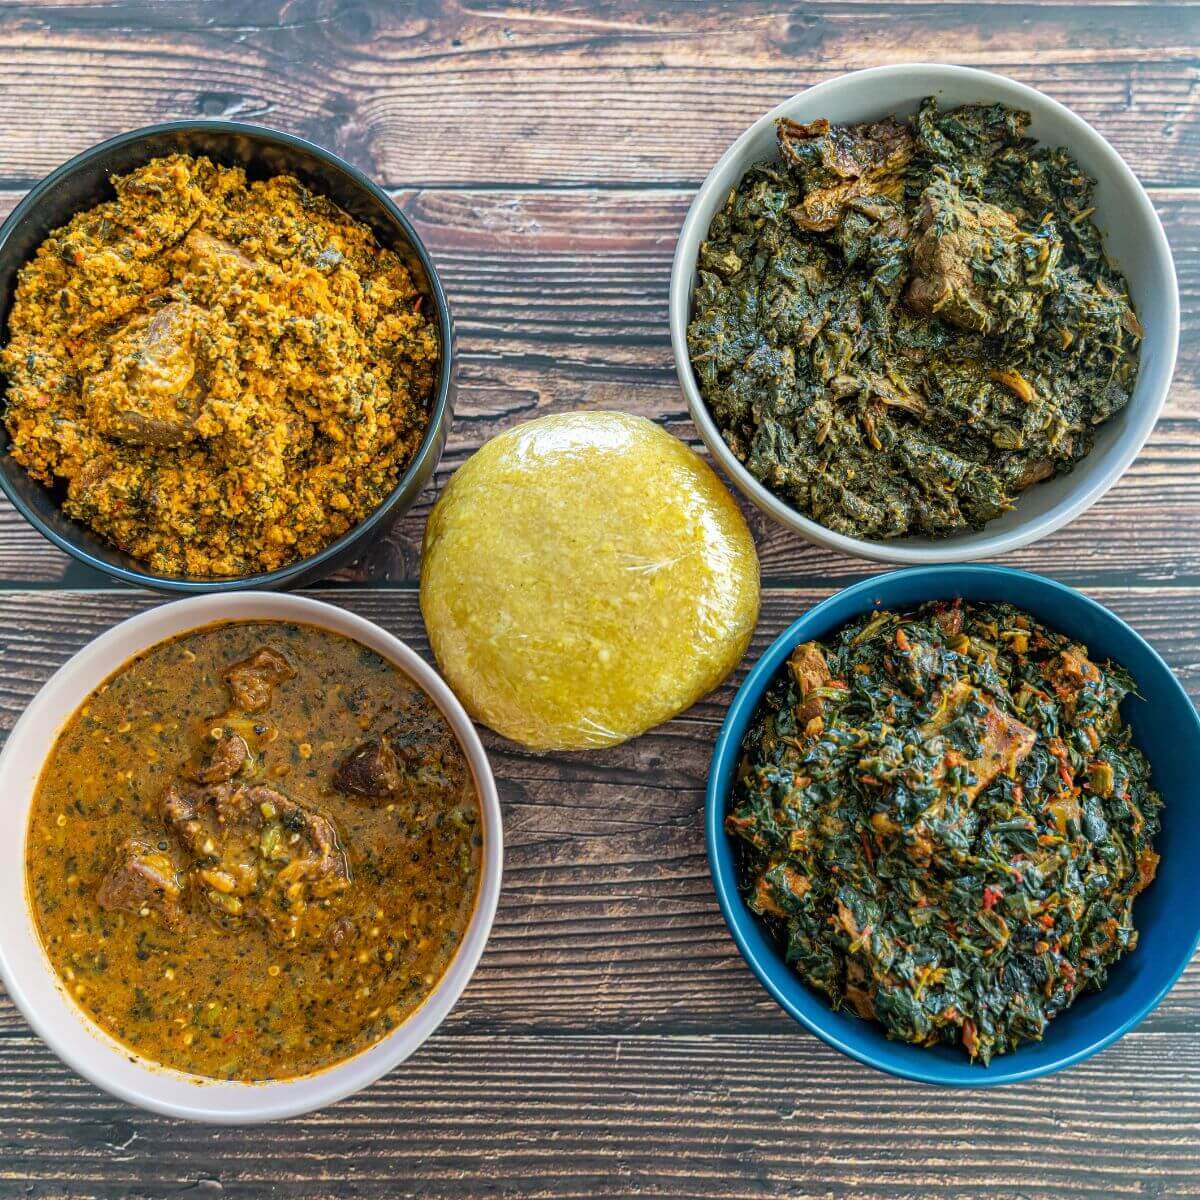 a nigerian swallow surrounded by stews and soups